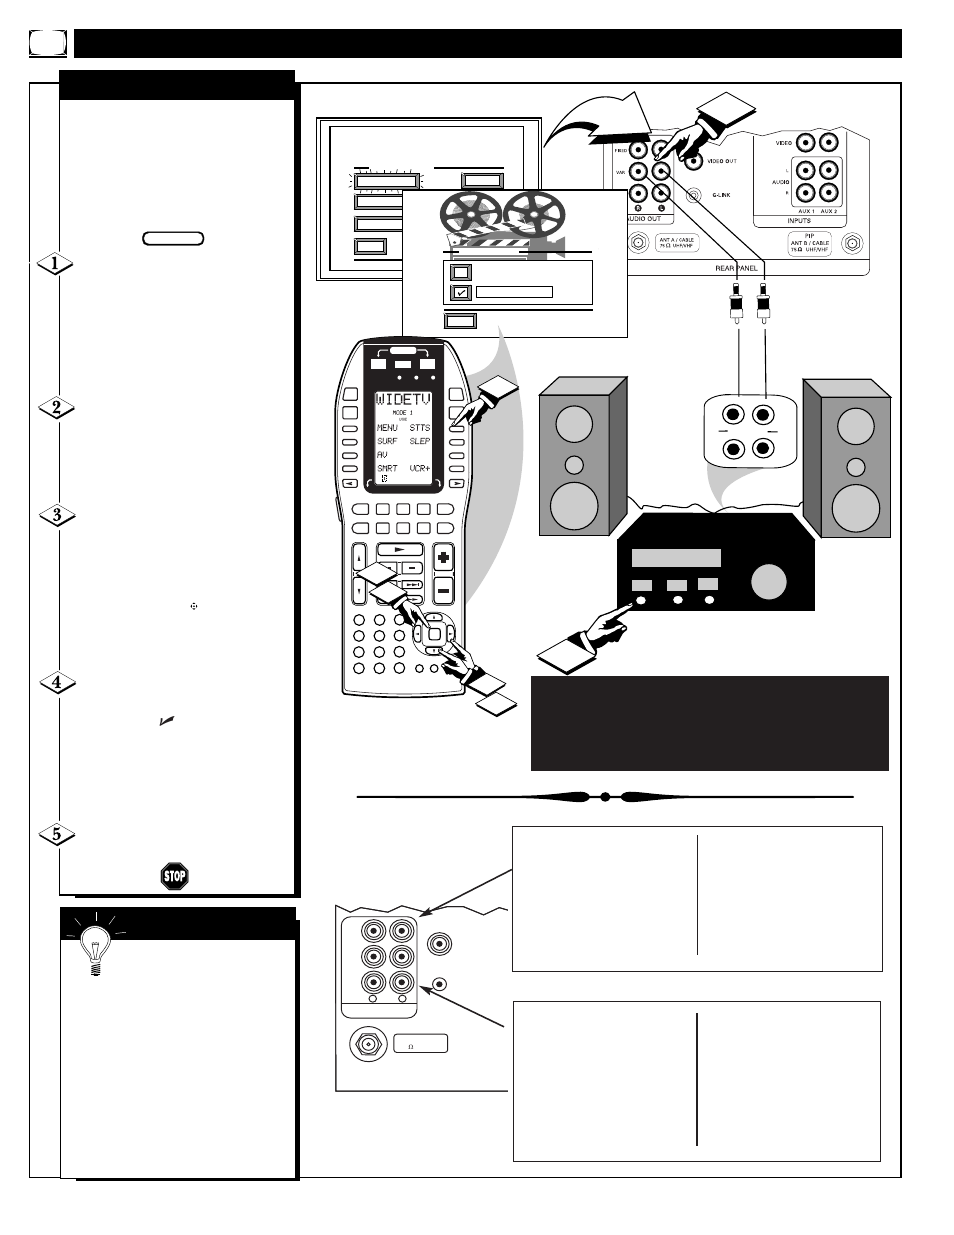 Ound, Ontrols, Continued | Tv speakers, Mart | Marantz PV5580 User Manual | Page 30 / 56